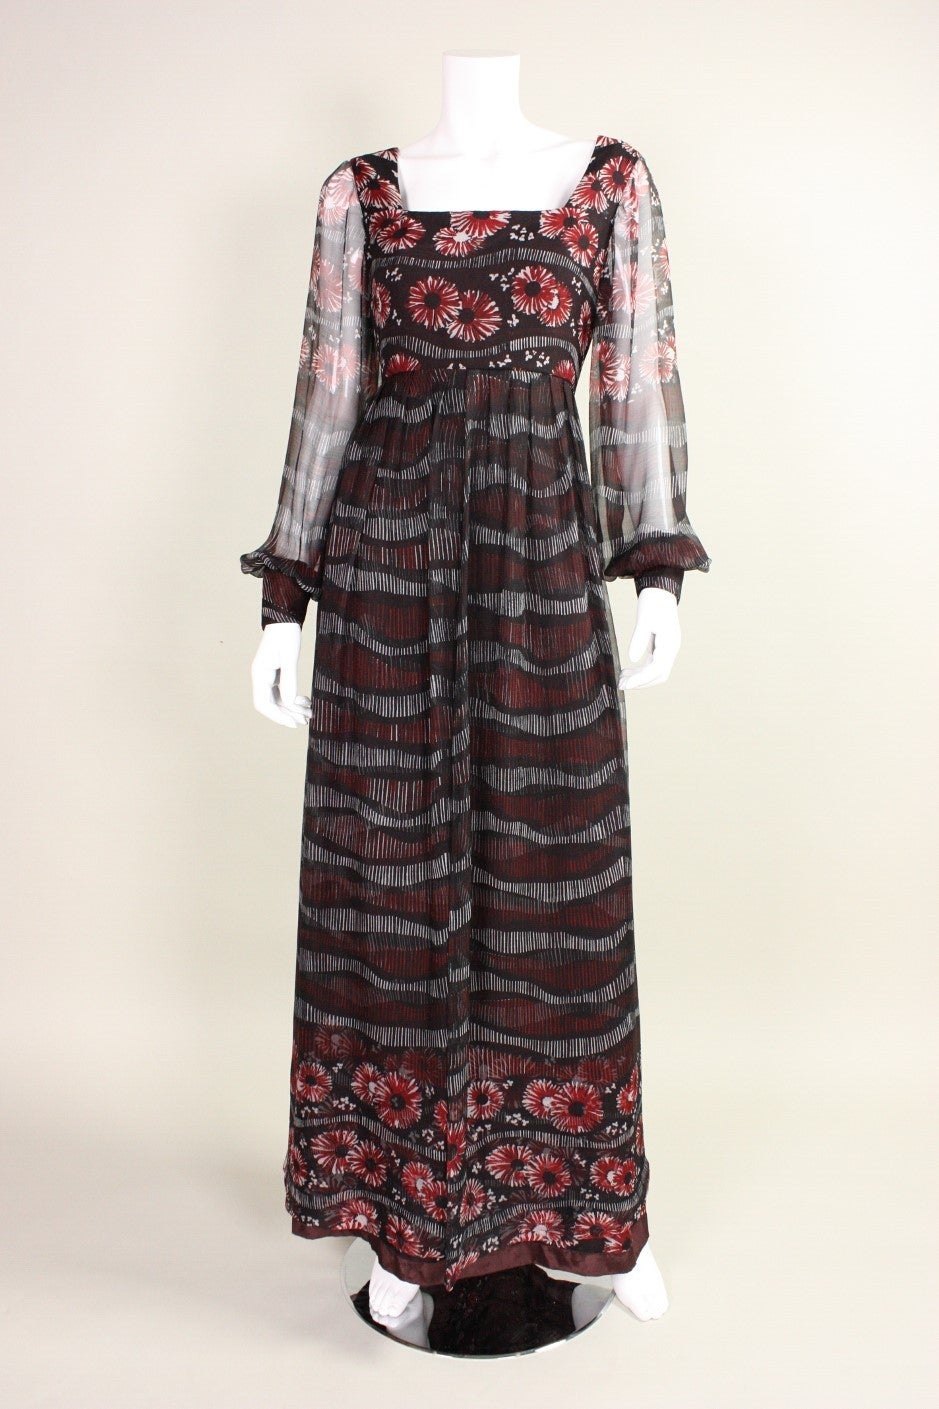 Vintage Vera Hicks maxi dress dates to the 1970's is made of black silk chiffon with a floral print.  Long sheer sleeves have fitted cuffs with snap closures.  Ankle length skirt has chiffon over layer  that is gathered all around waistband and is